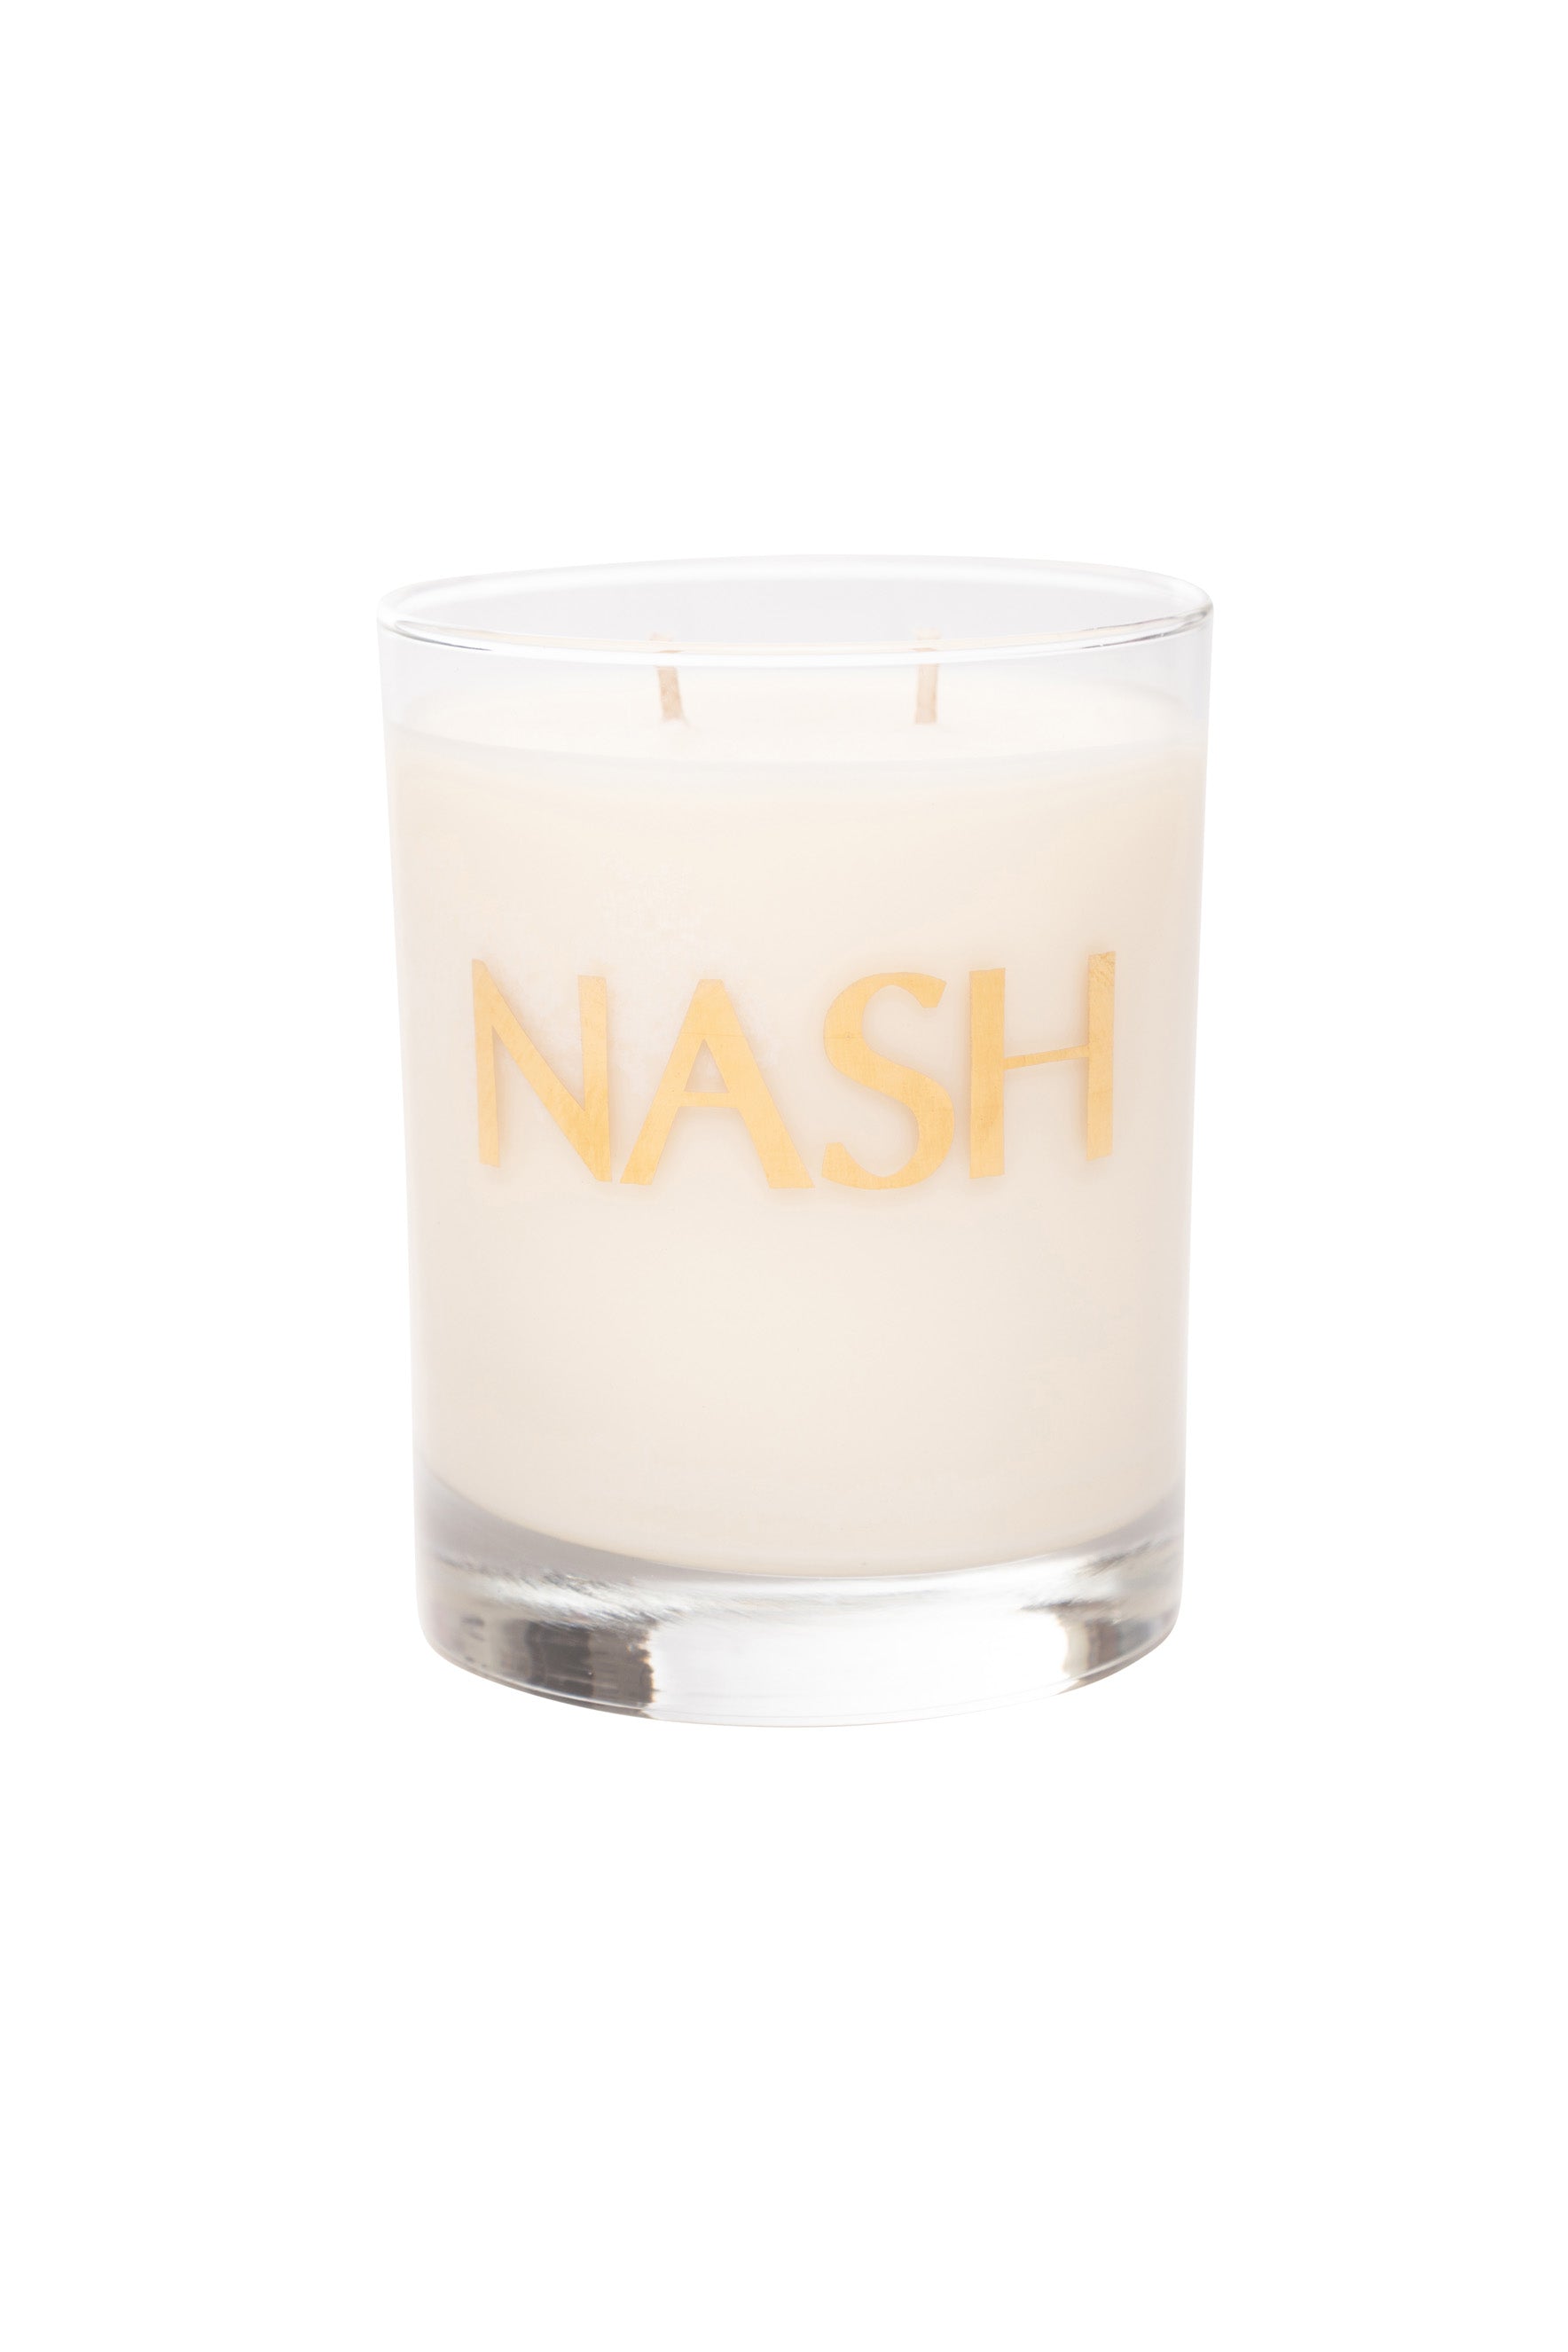 Nashville Two Wick Cocktail Collection Candle